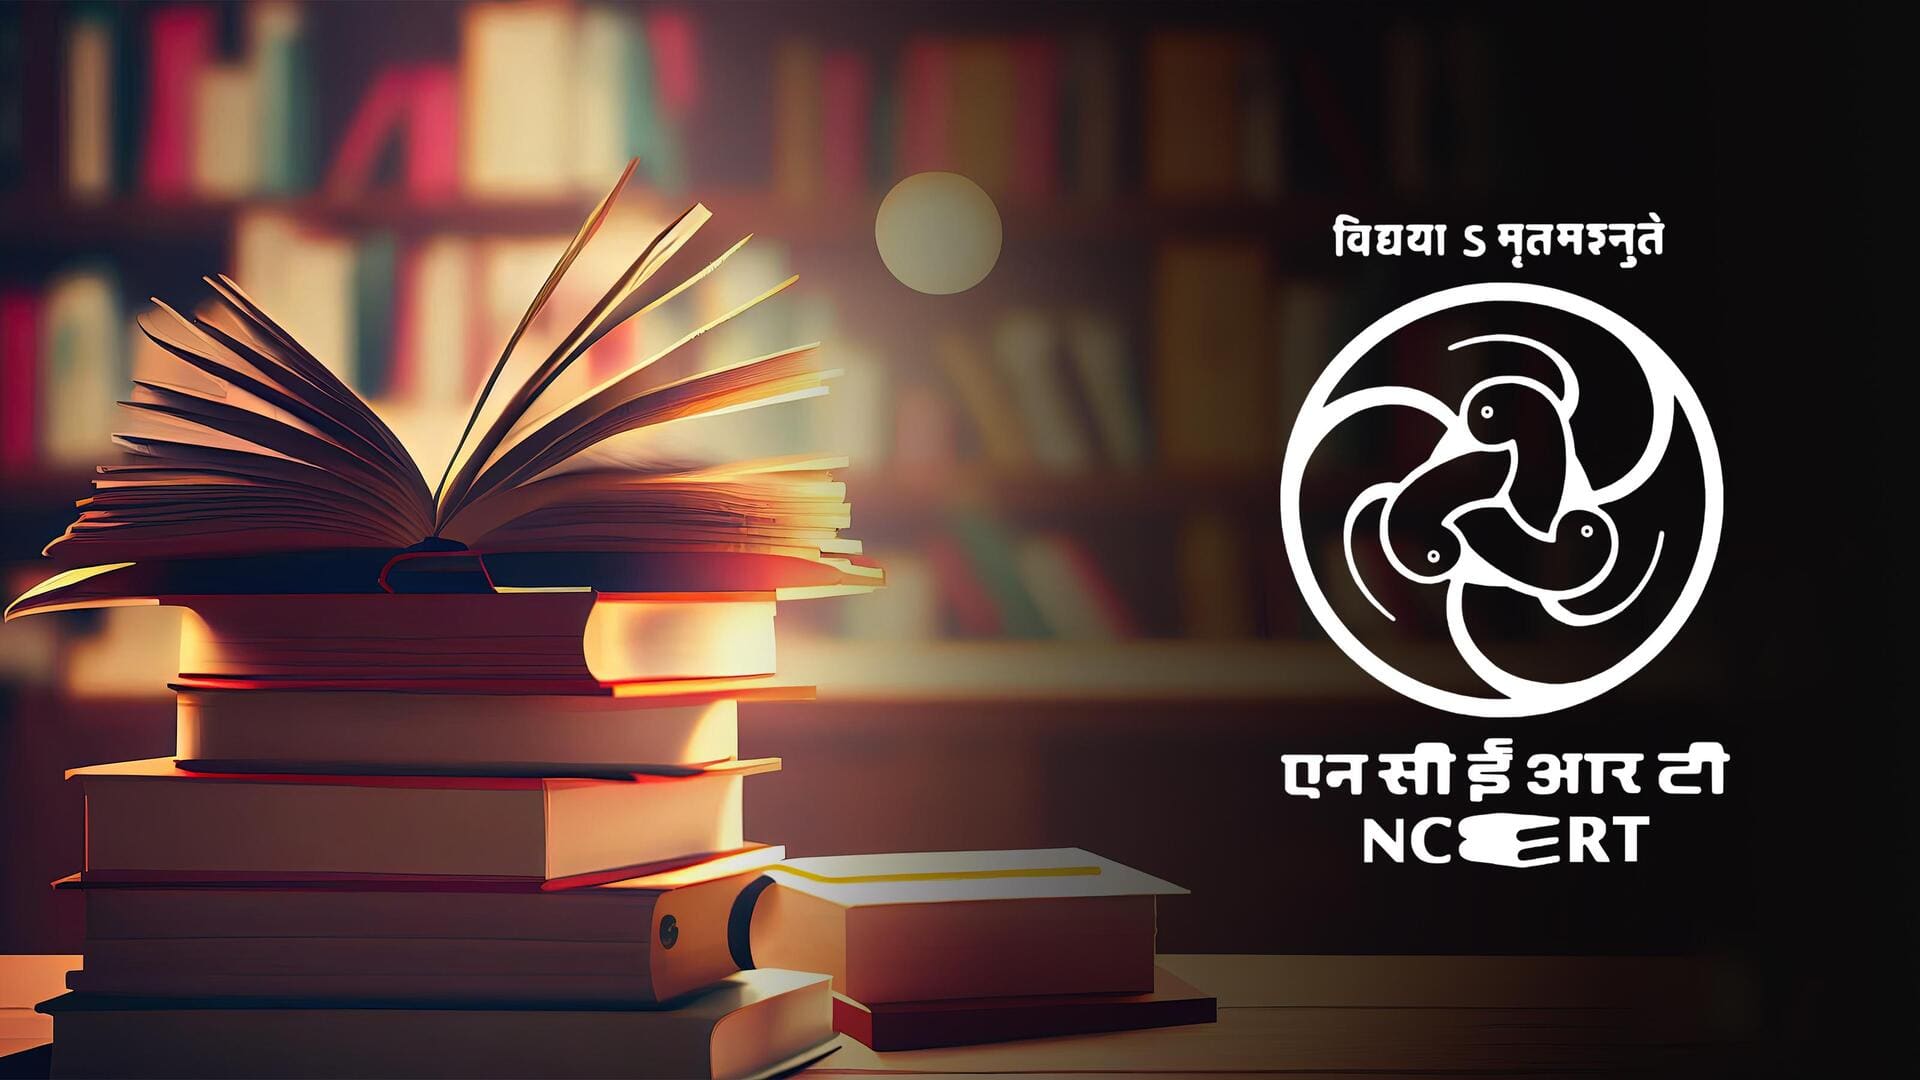 New NCERT books to have 'Bharat' instead of 'India'